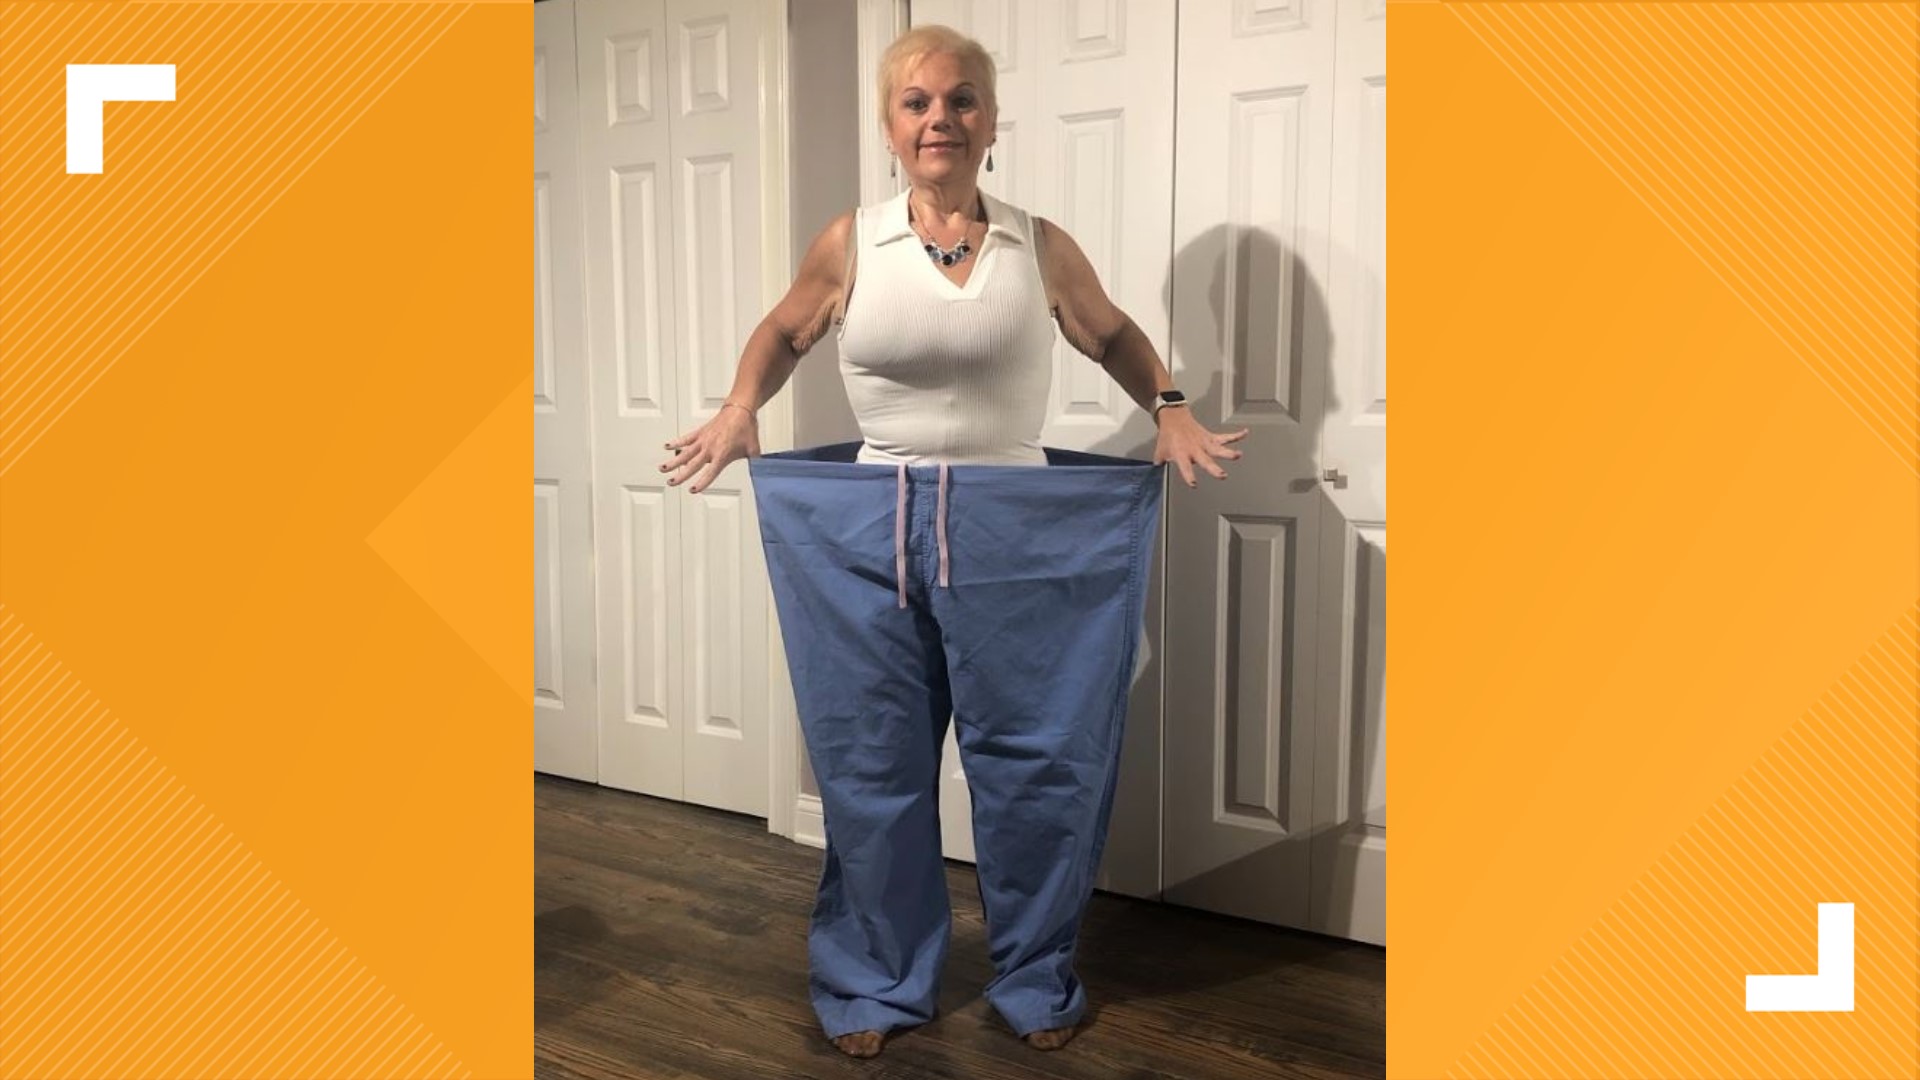 Jennifer Pruss lost half her body weight in the eight months after her surgery.